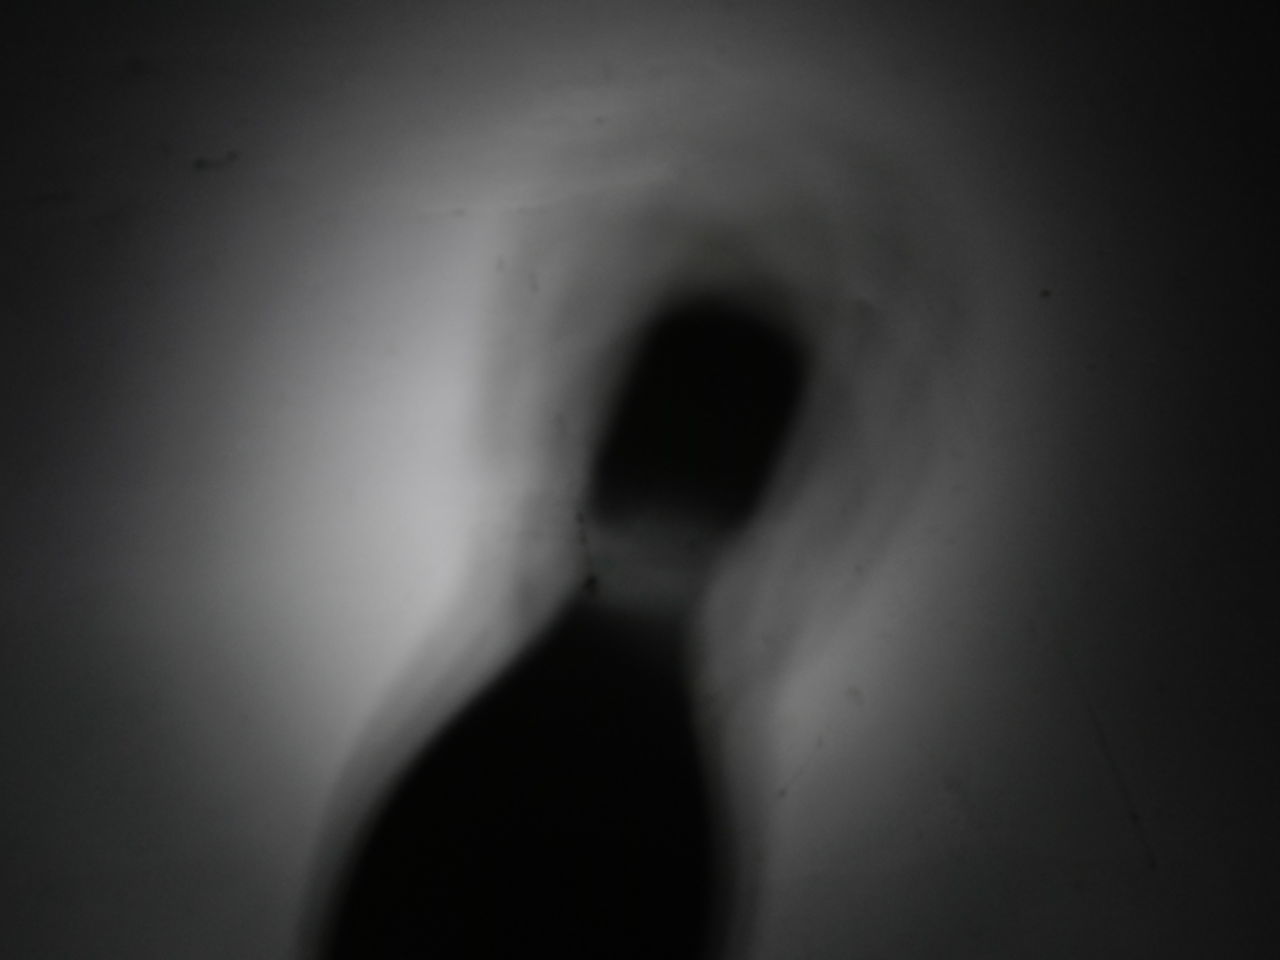 CLOSE-UP OF A BLURRED MOTION OF WOMAN IN BACKGROUND